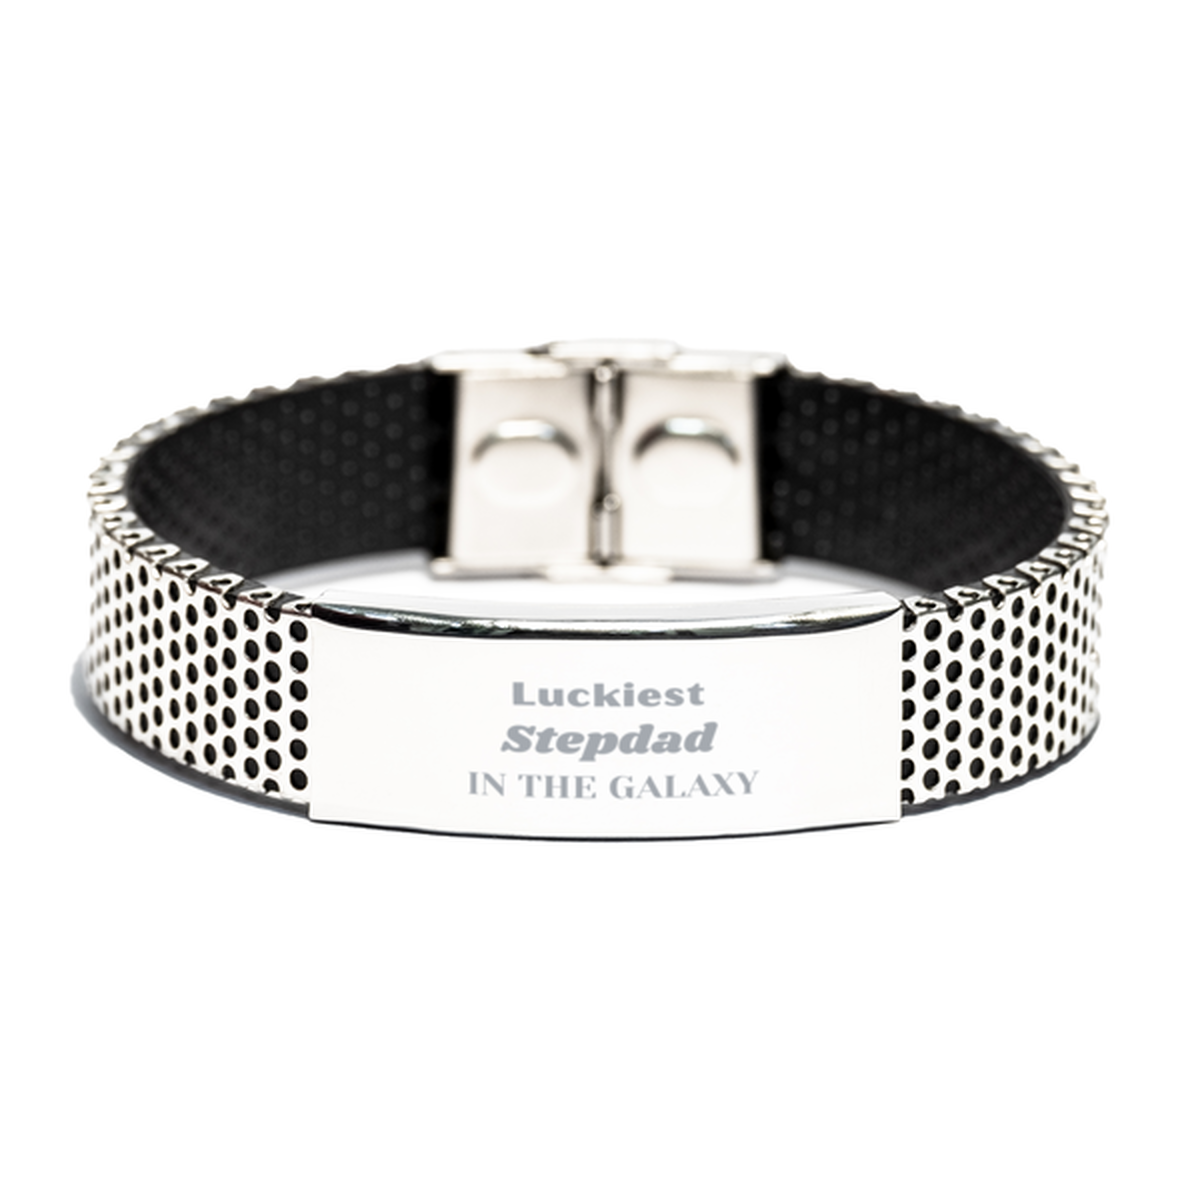 Luckiest Stepdad in the Galaxy, To My Stepdad Engraved Gifts, Christmas Stepdad Stainless Steel Bracelet Gifts, X-mas Birthday Unique Gifts For Stepdad Men Women